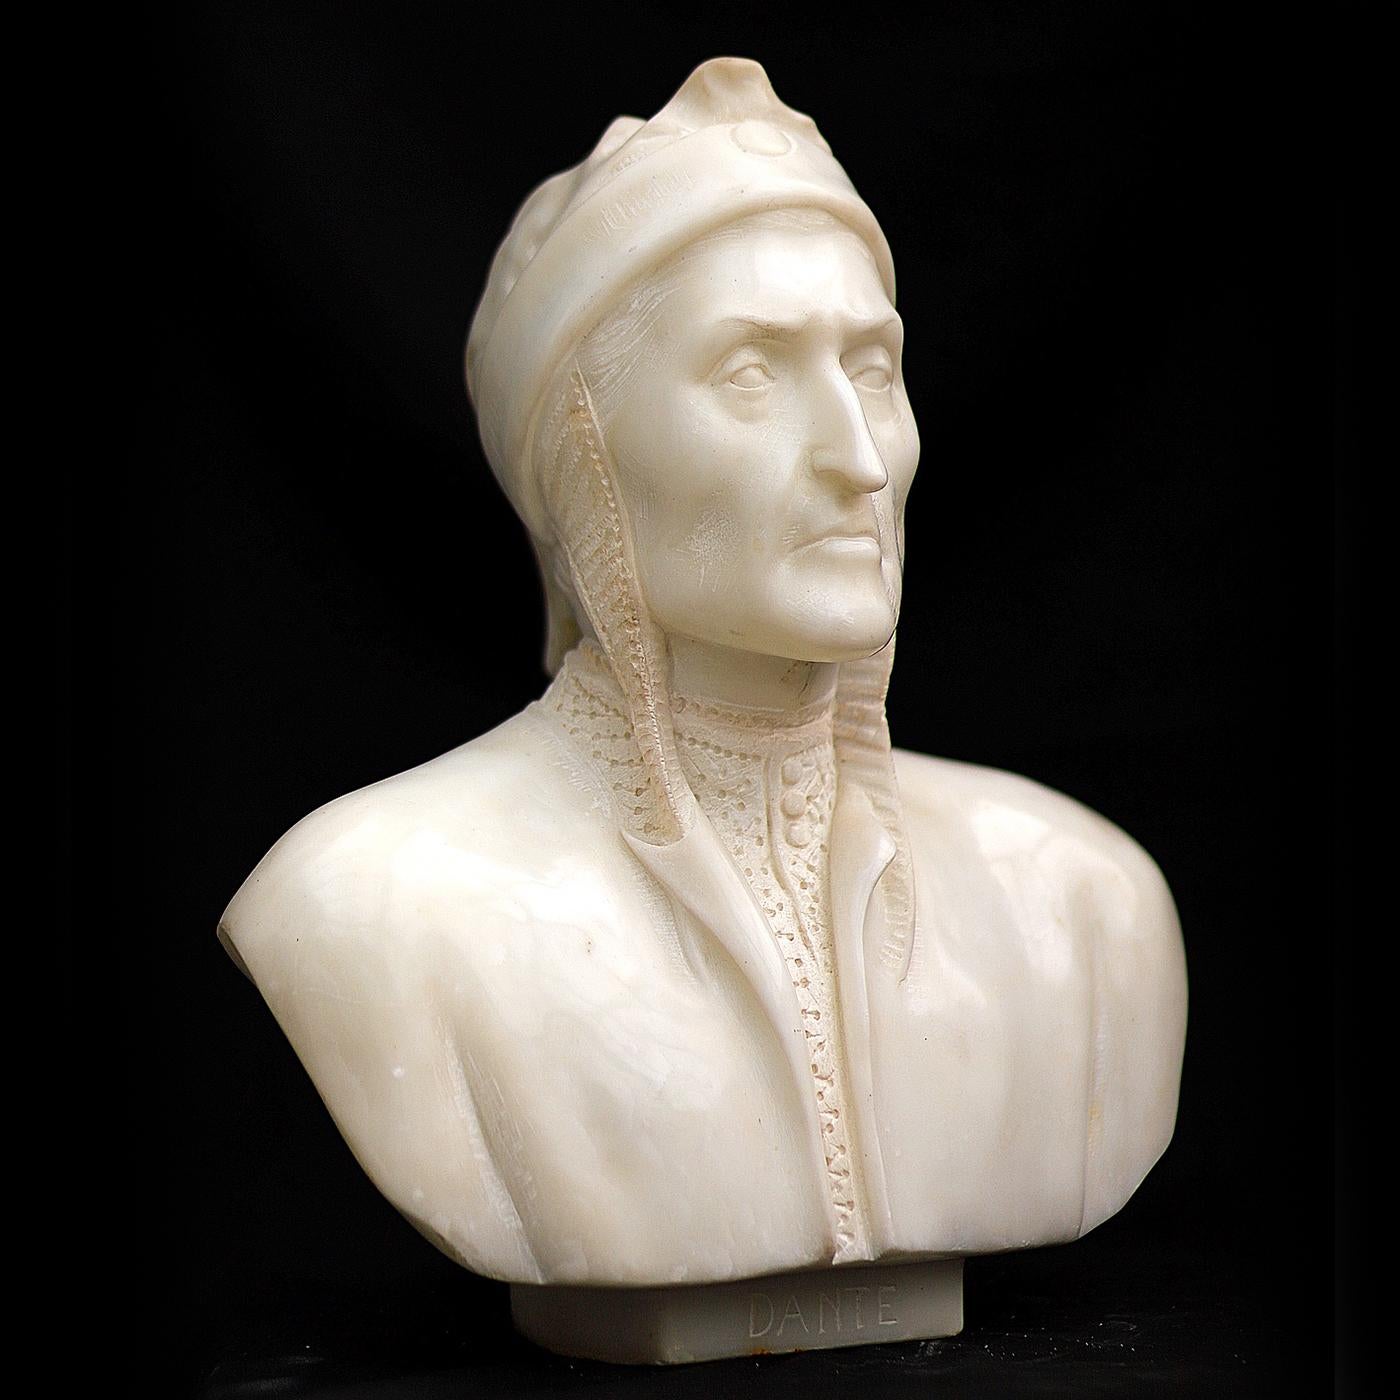 This handmade marble bust is a lifelike portrayal of Dante Alighieri, the world-famous Florentine writer known as the father of the Italian language. The artist is portrayed in a classical pose highlighting his somber, angular facial features and